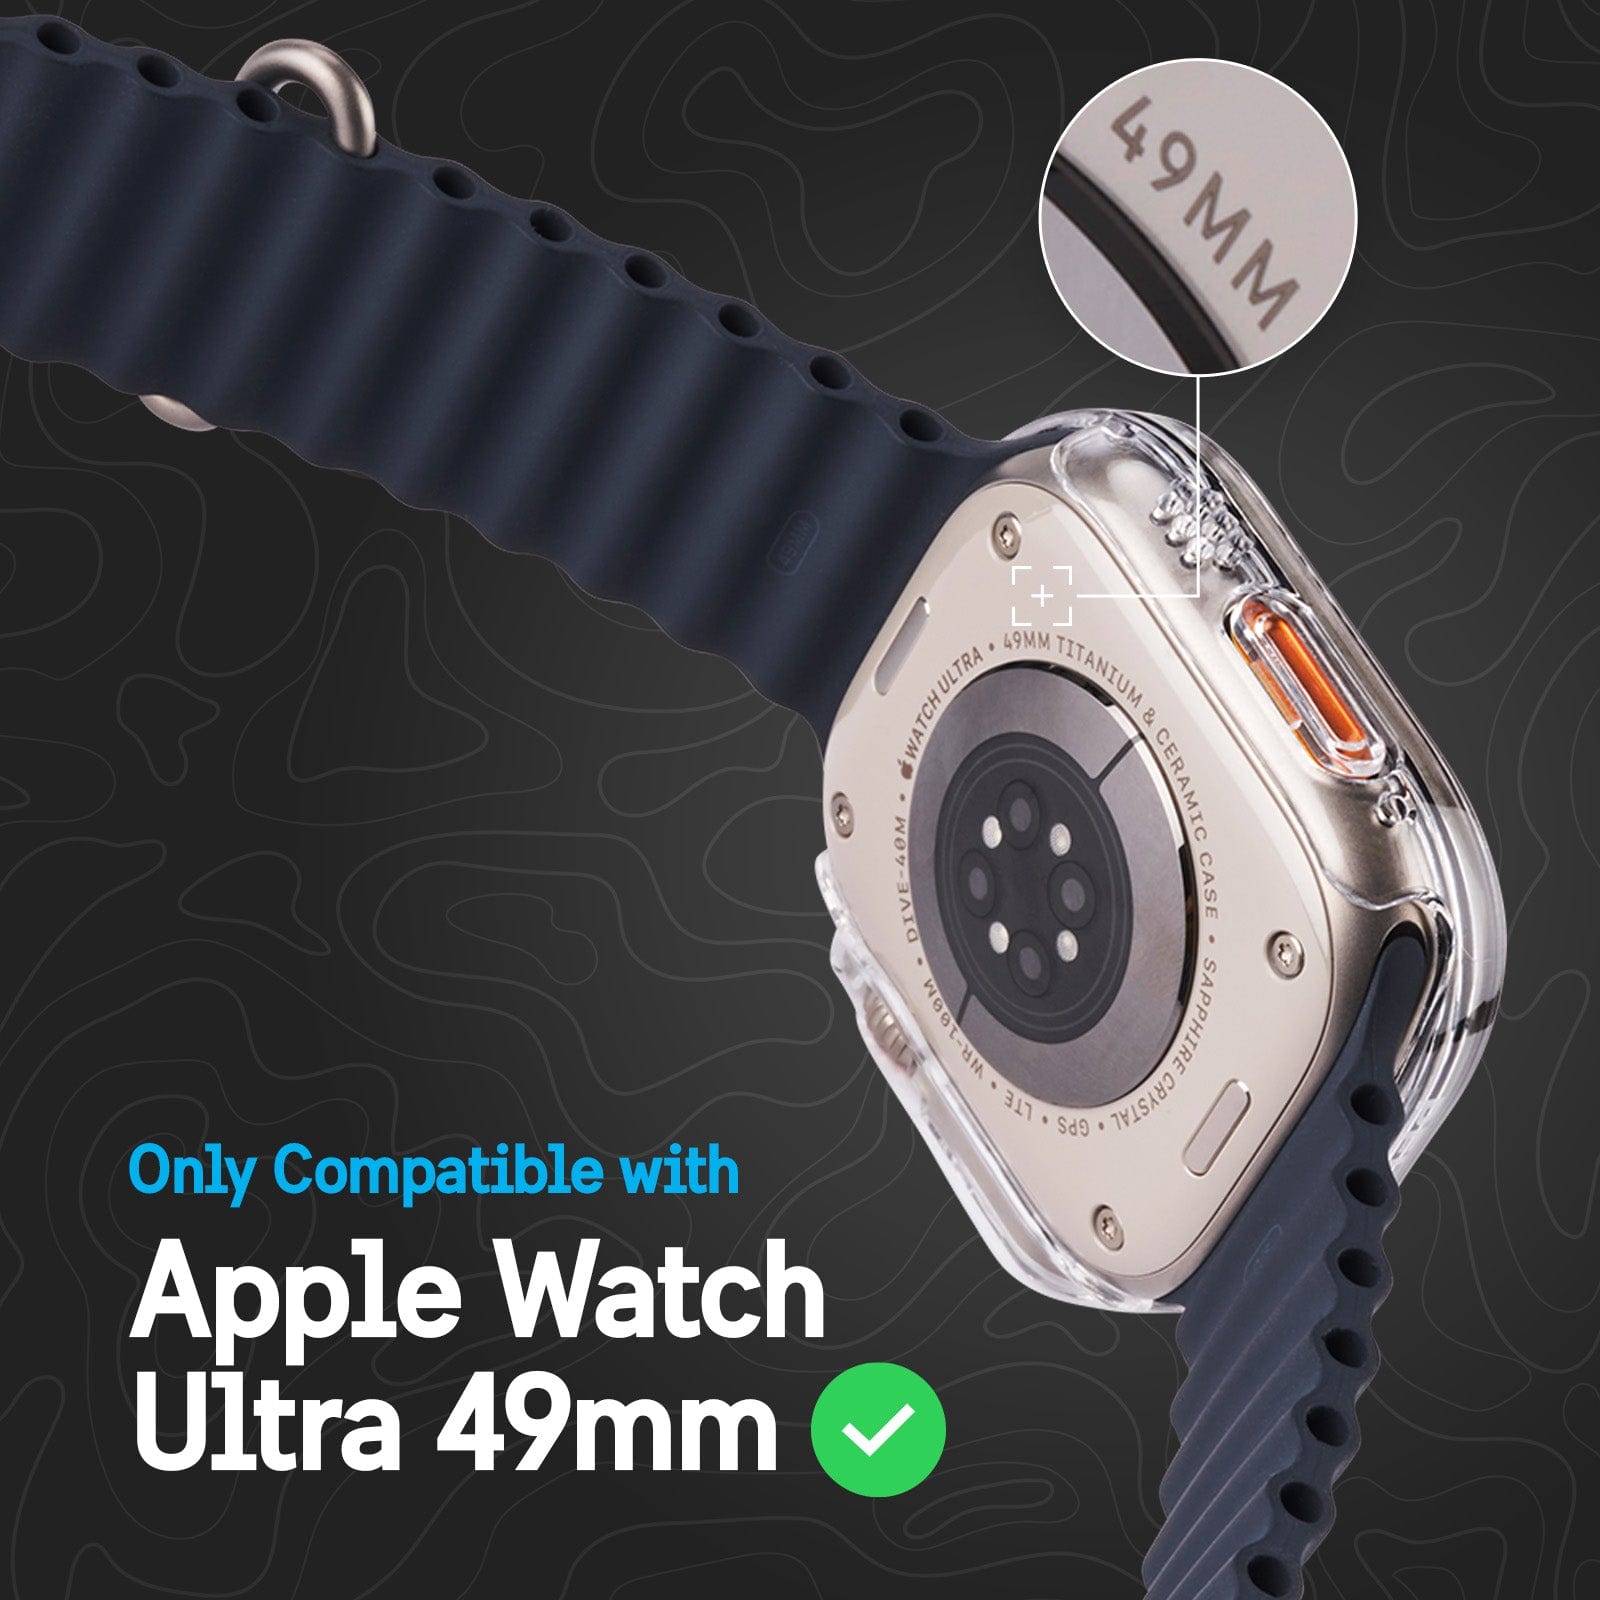 Only compatible with Apple Watch Ultra 49mm